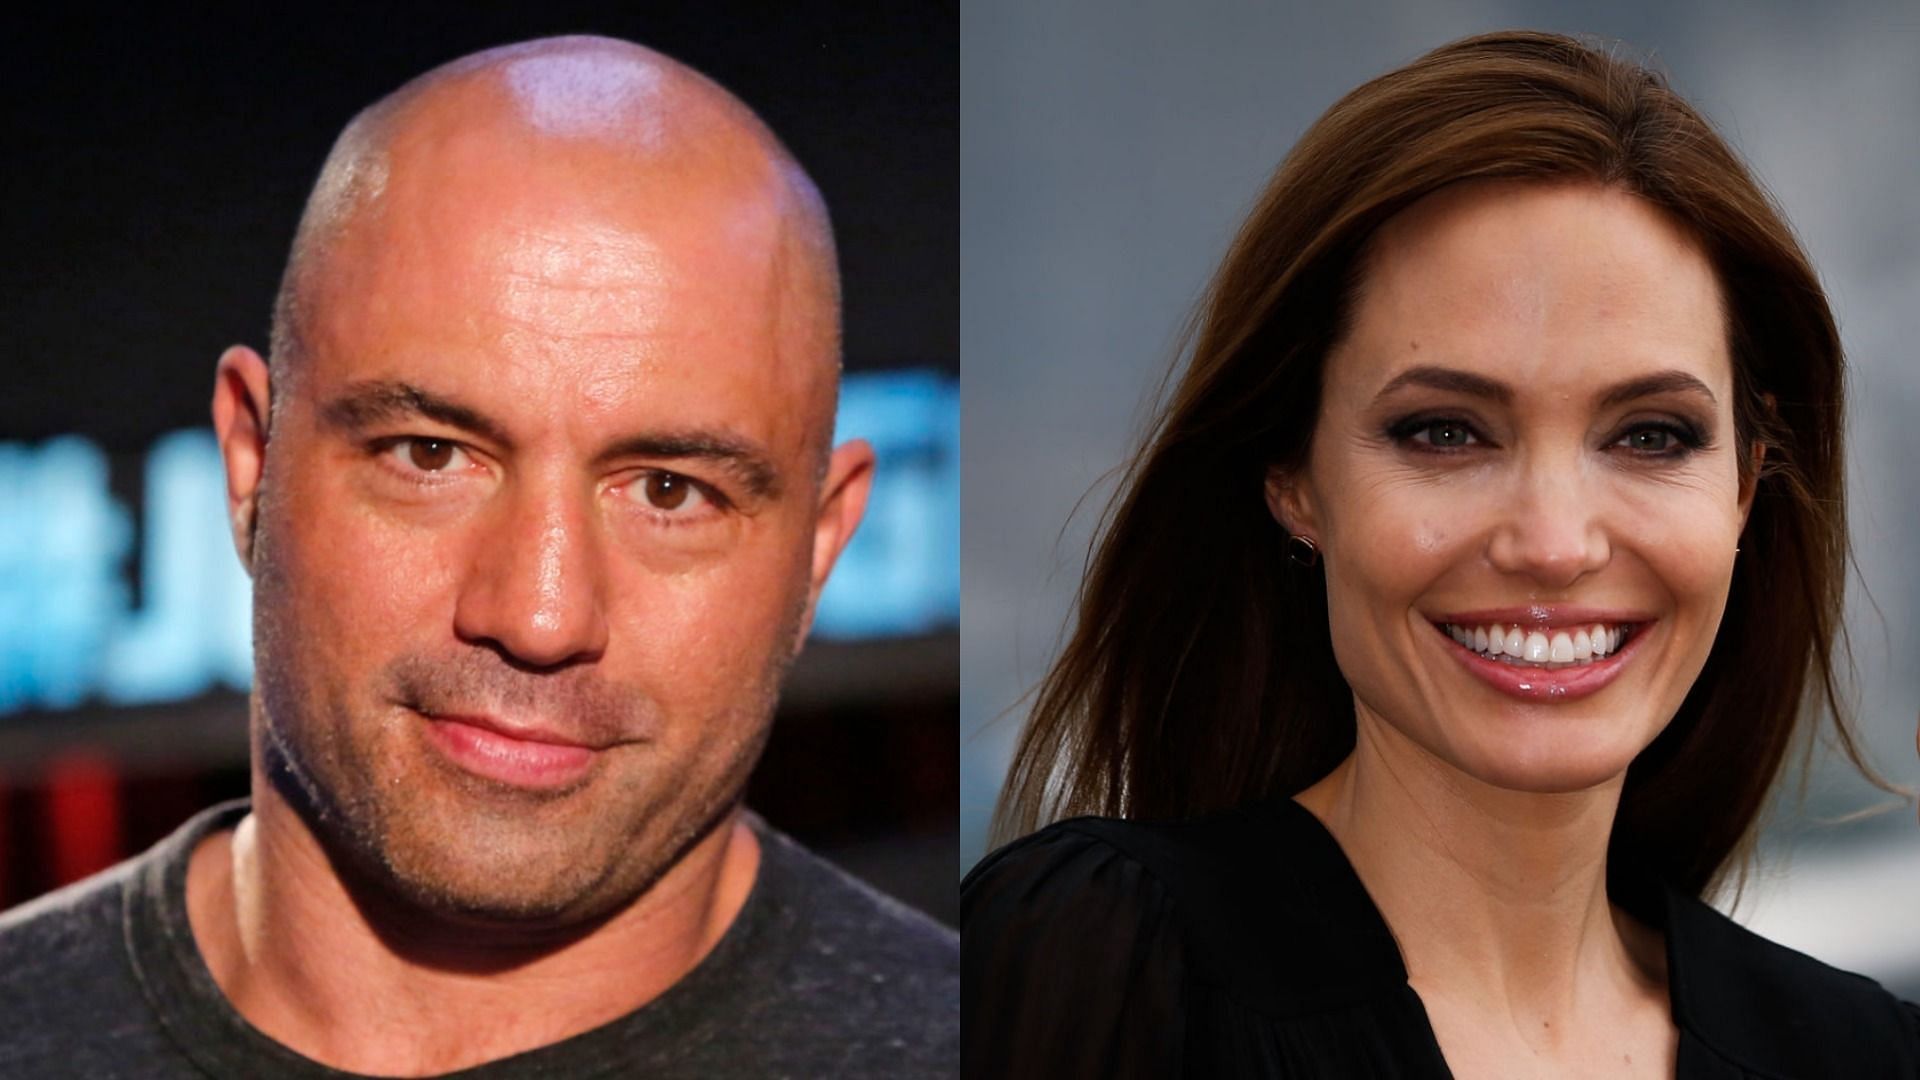 Joe Rogan has come under fire again for controversial comments on Angelina Jolie (Image via Vivian Zink/Getty Images and VCG/Getty Images)